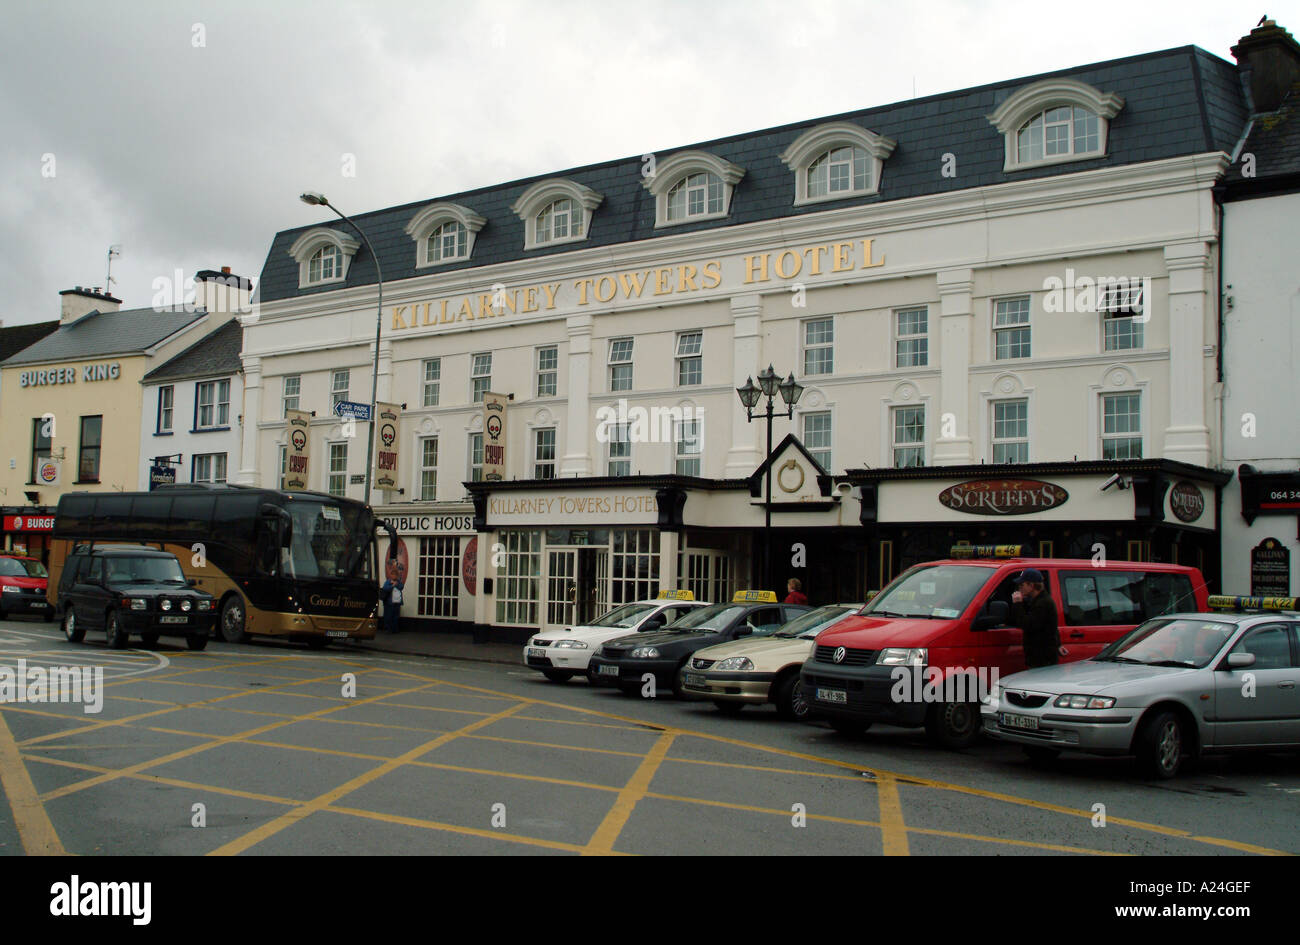 Killarney towers hotel hi-res stock photography and images - Alamy